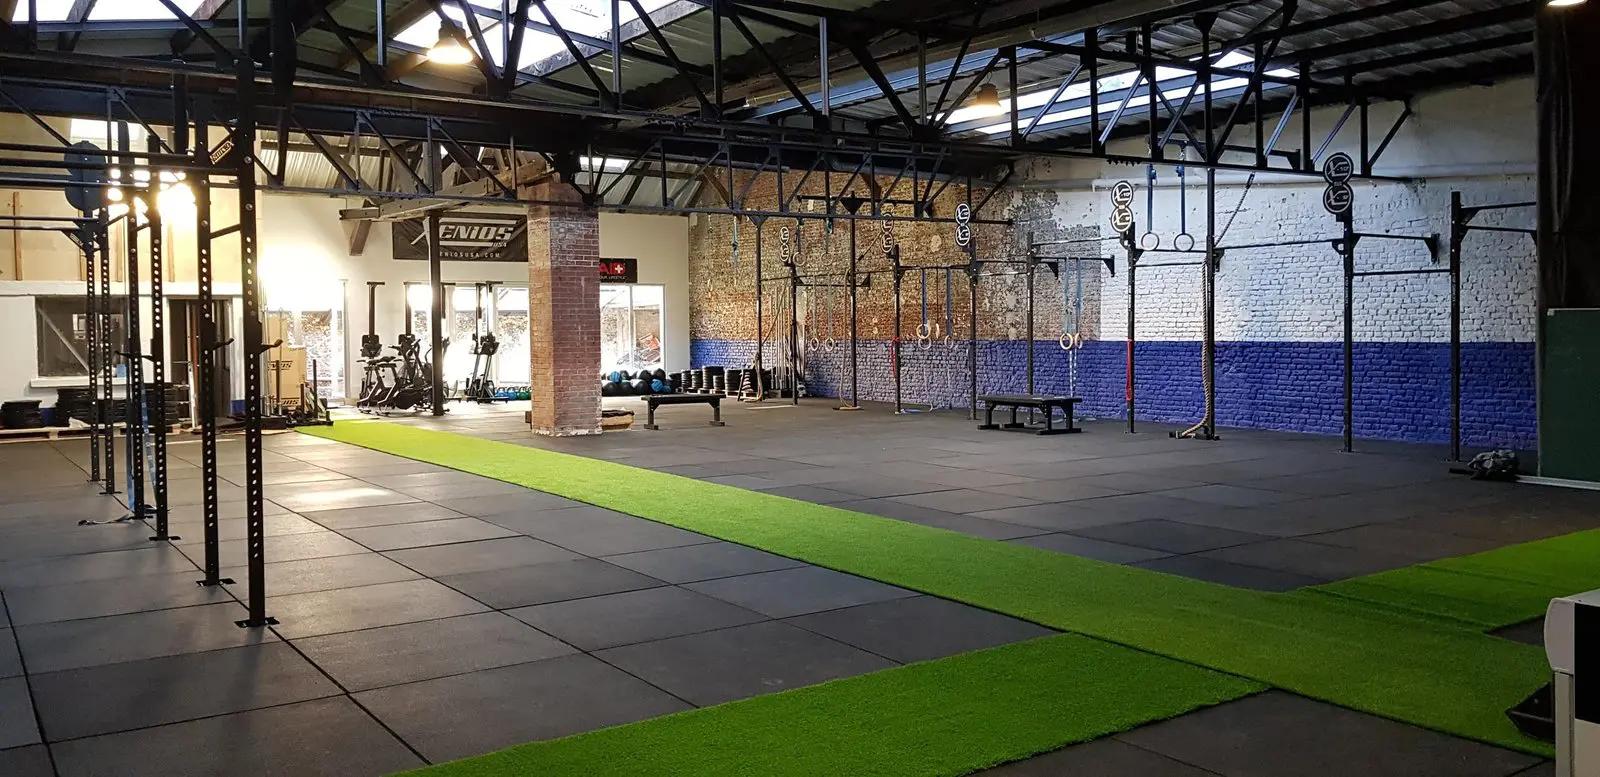 Atypical gym for your film shoots